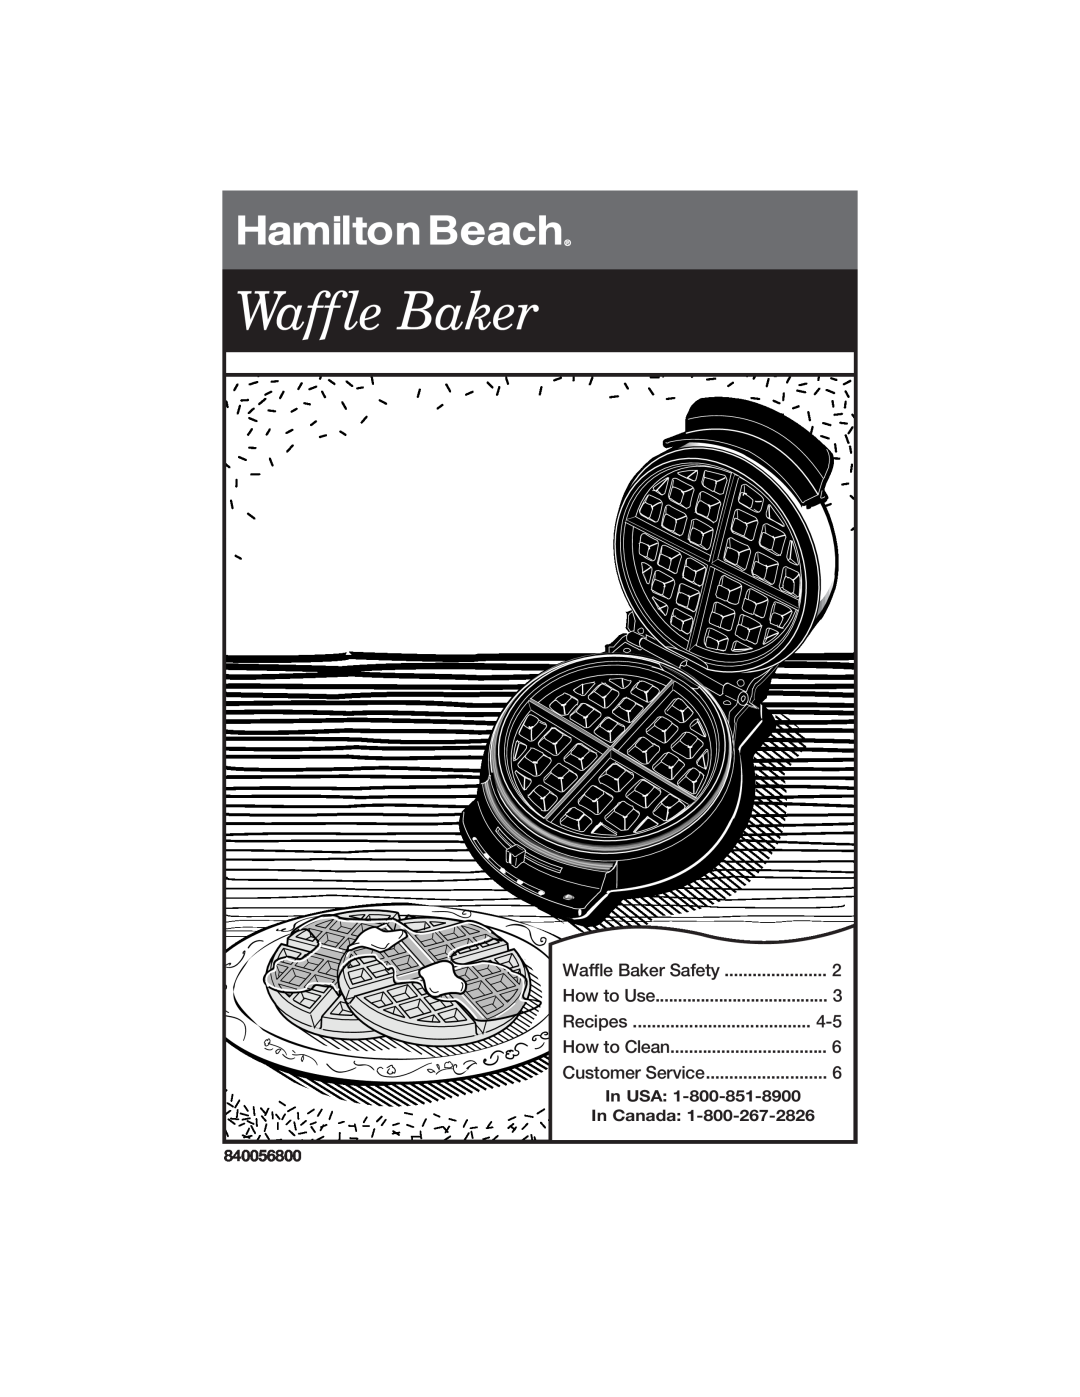 Hamilton Beach 840056800 manual Waffle Baker Safety, How to Use, Recipes, How to Clean, Customer Service, In USA 